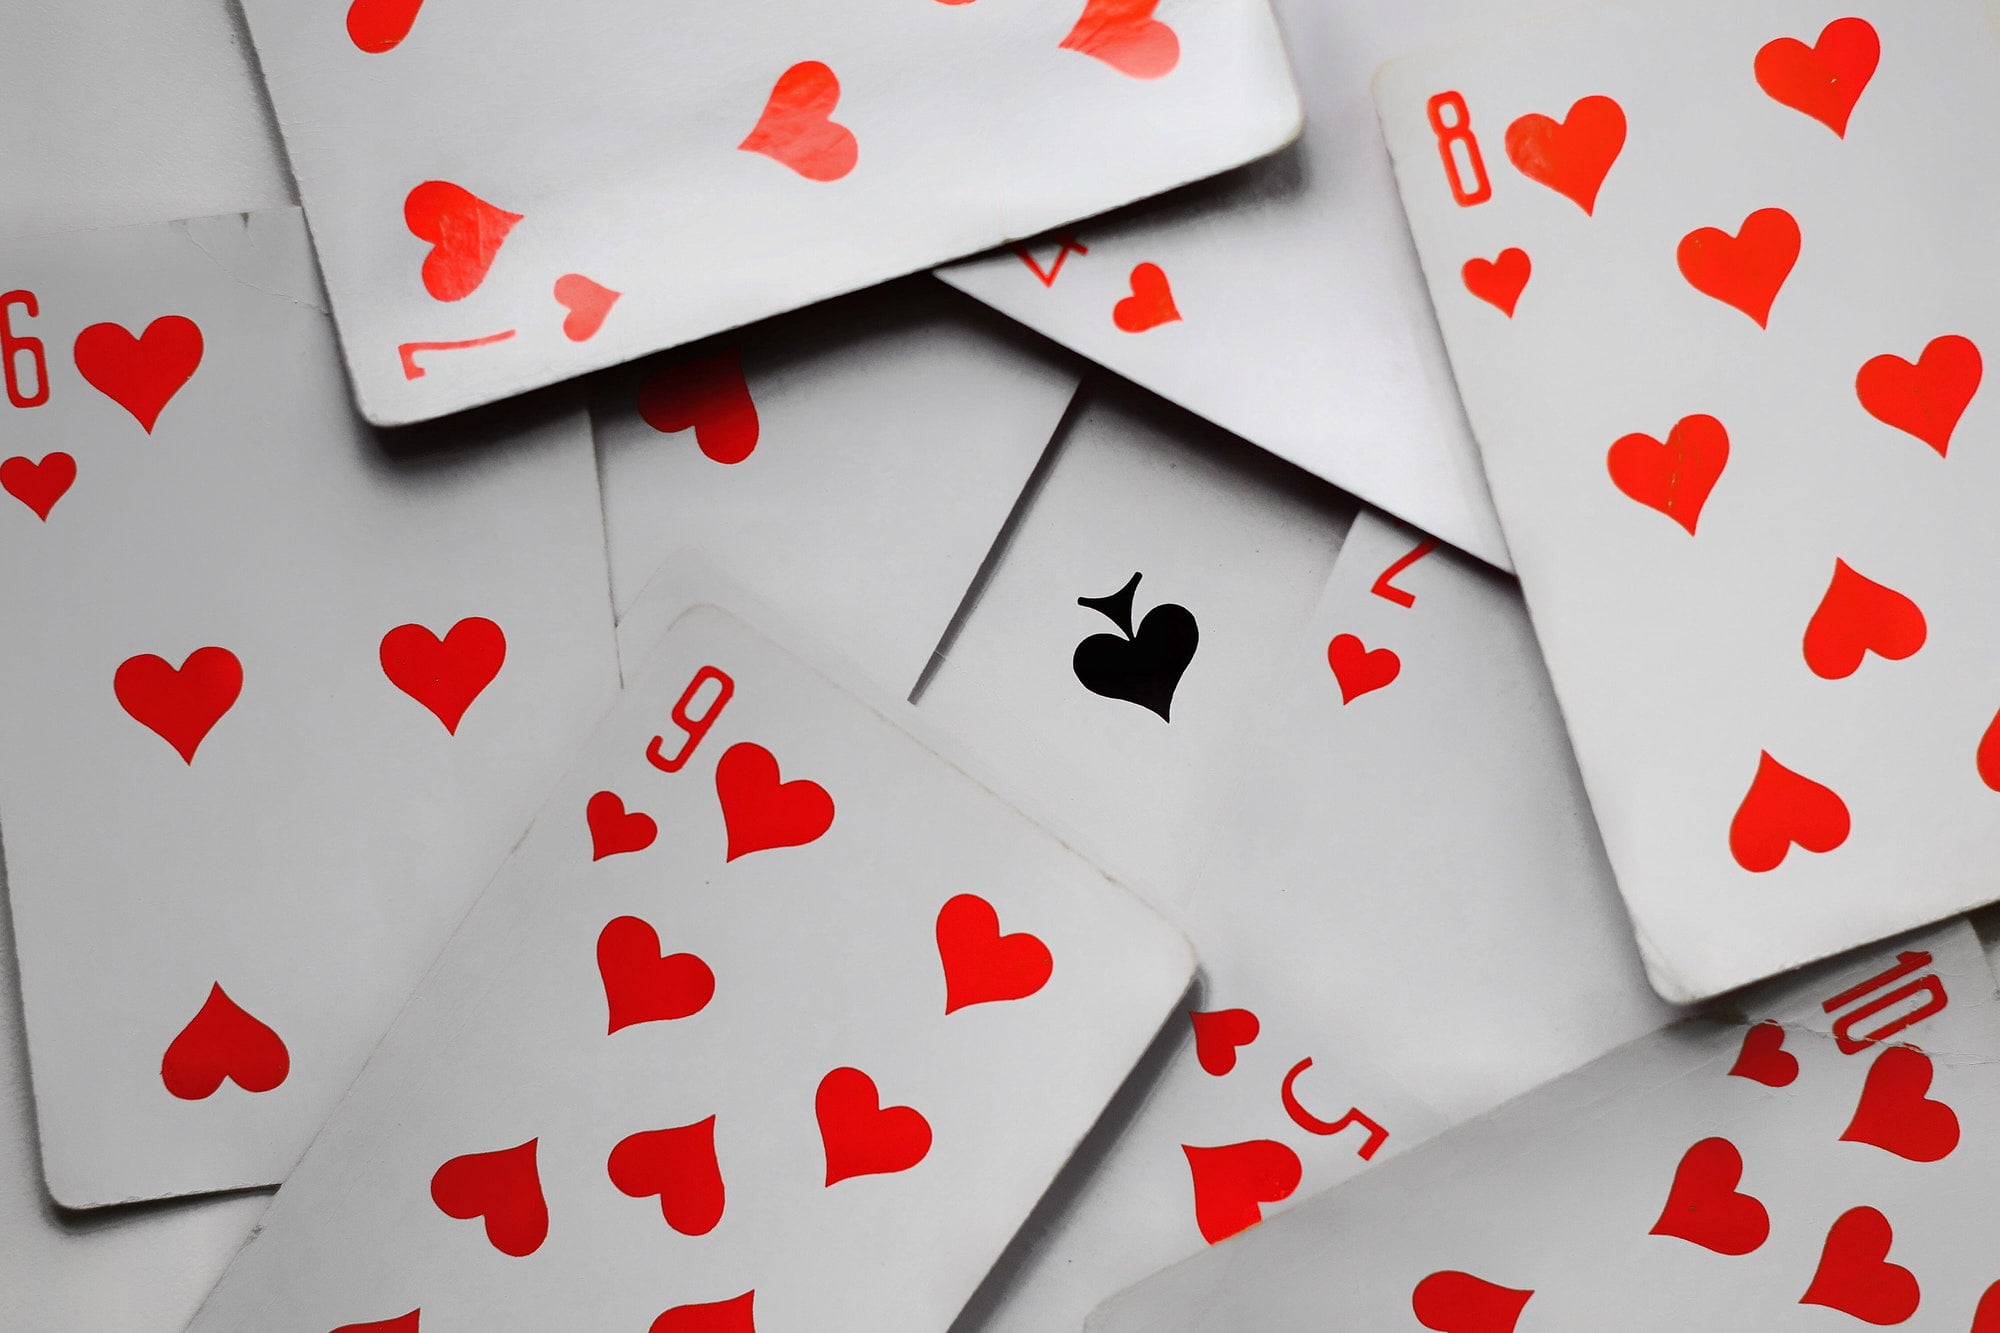 hearts card game for visually impaired online